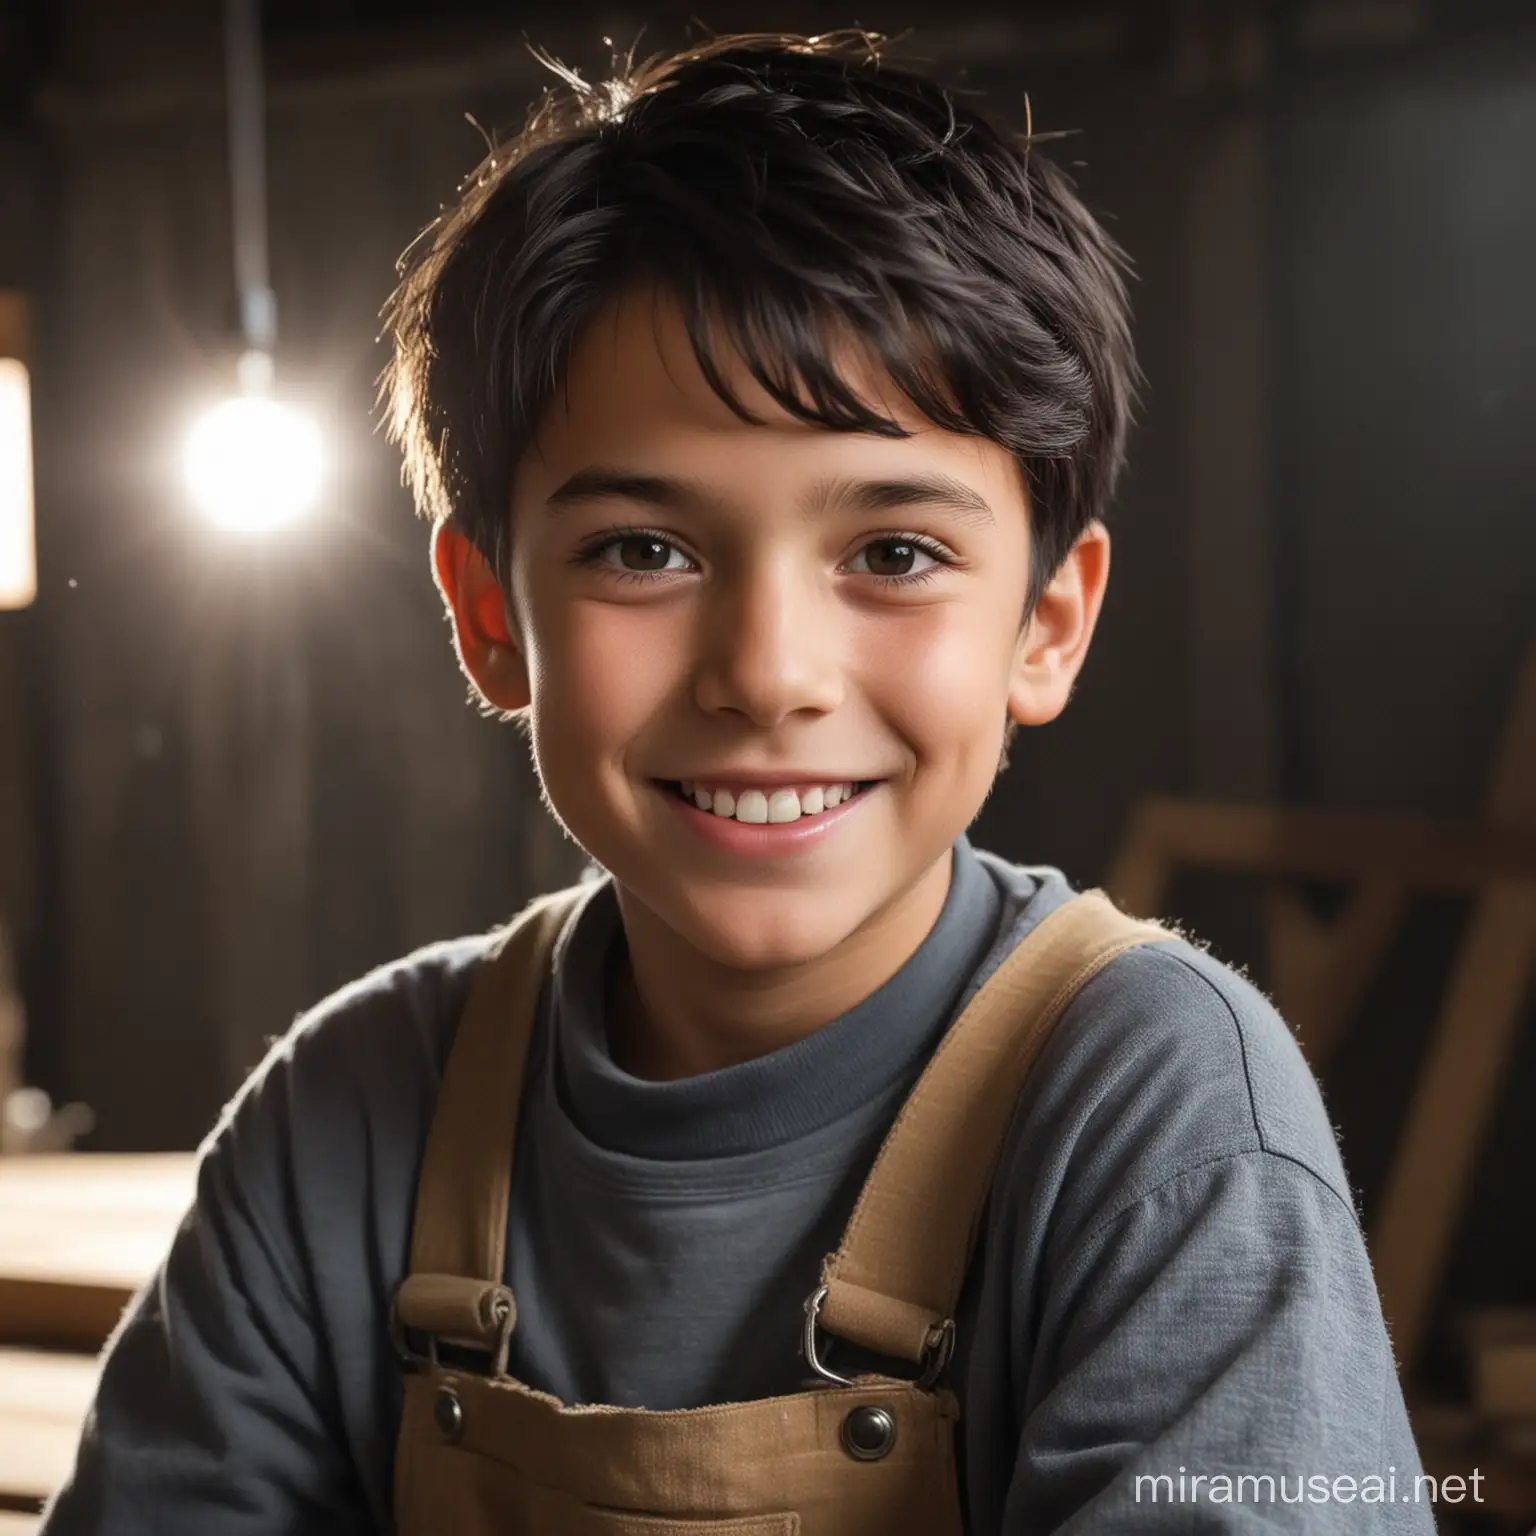 A young boy carpenter with black hair looks at the camera with a smile in a dark workshop with a beam of light shining on her face